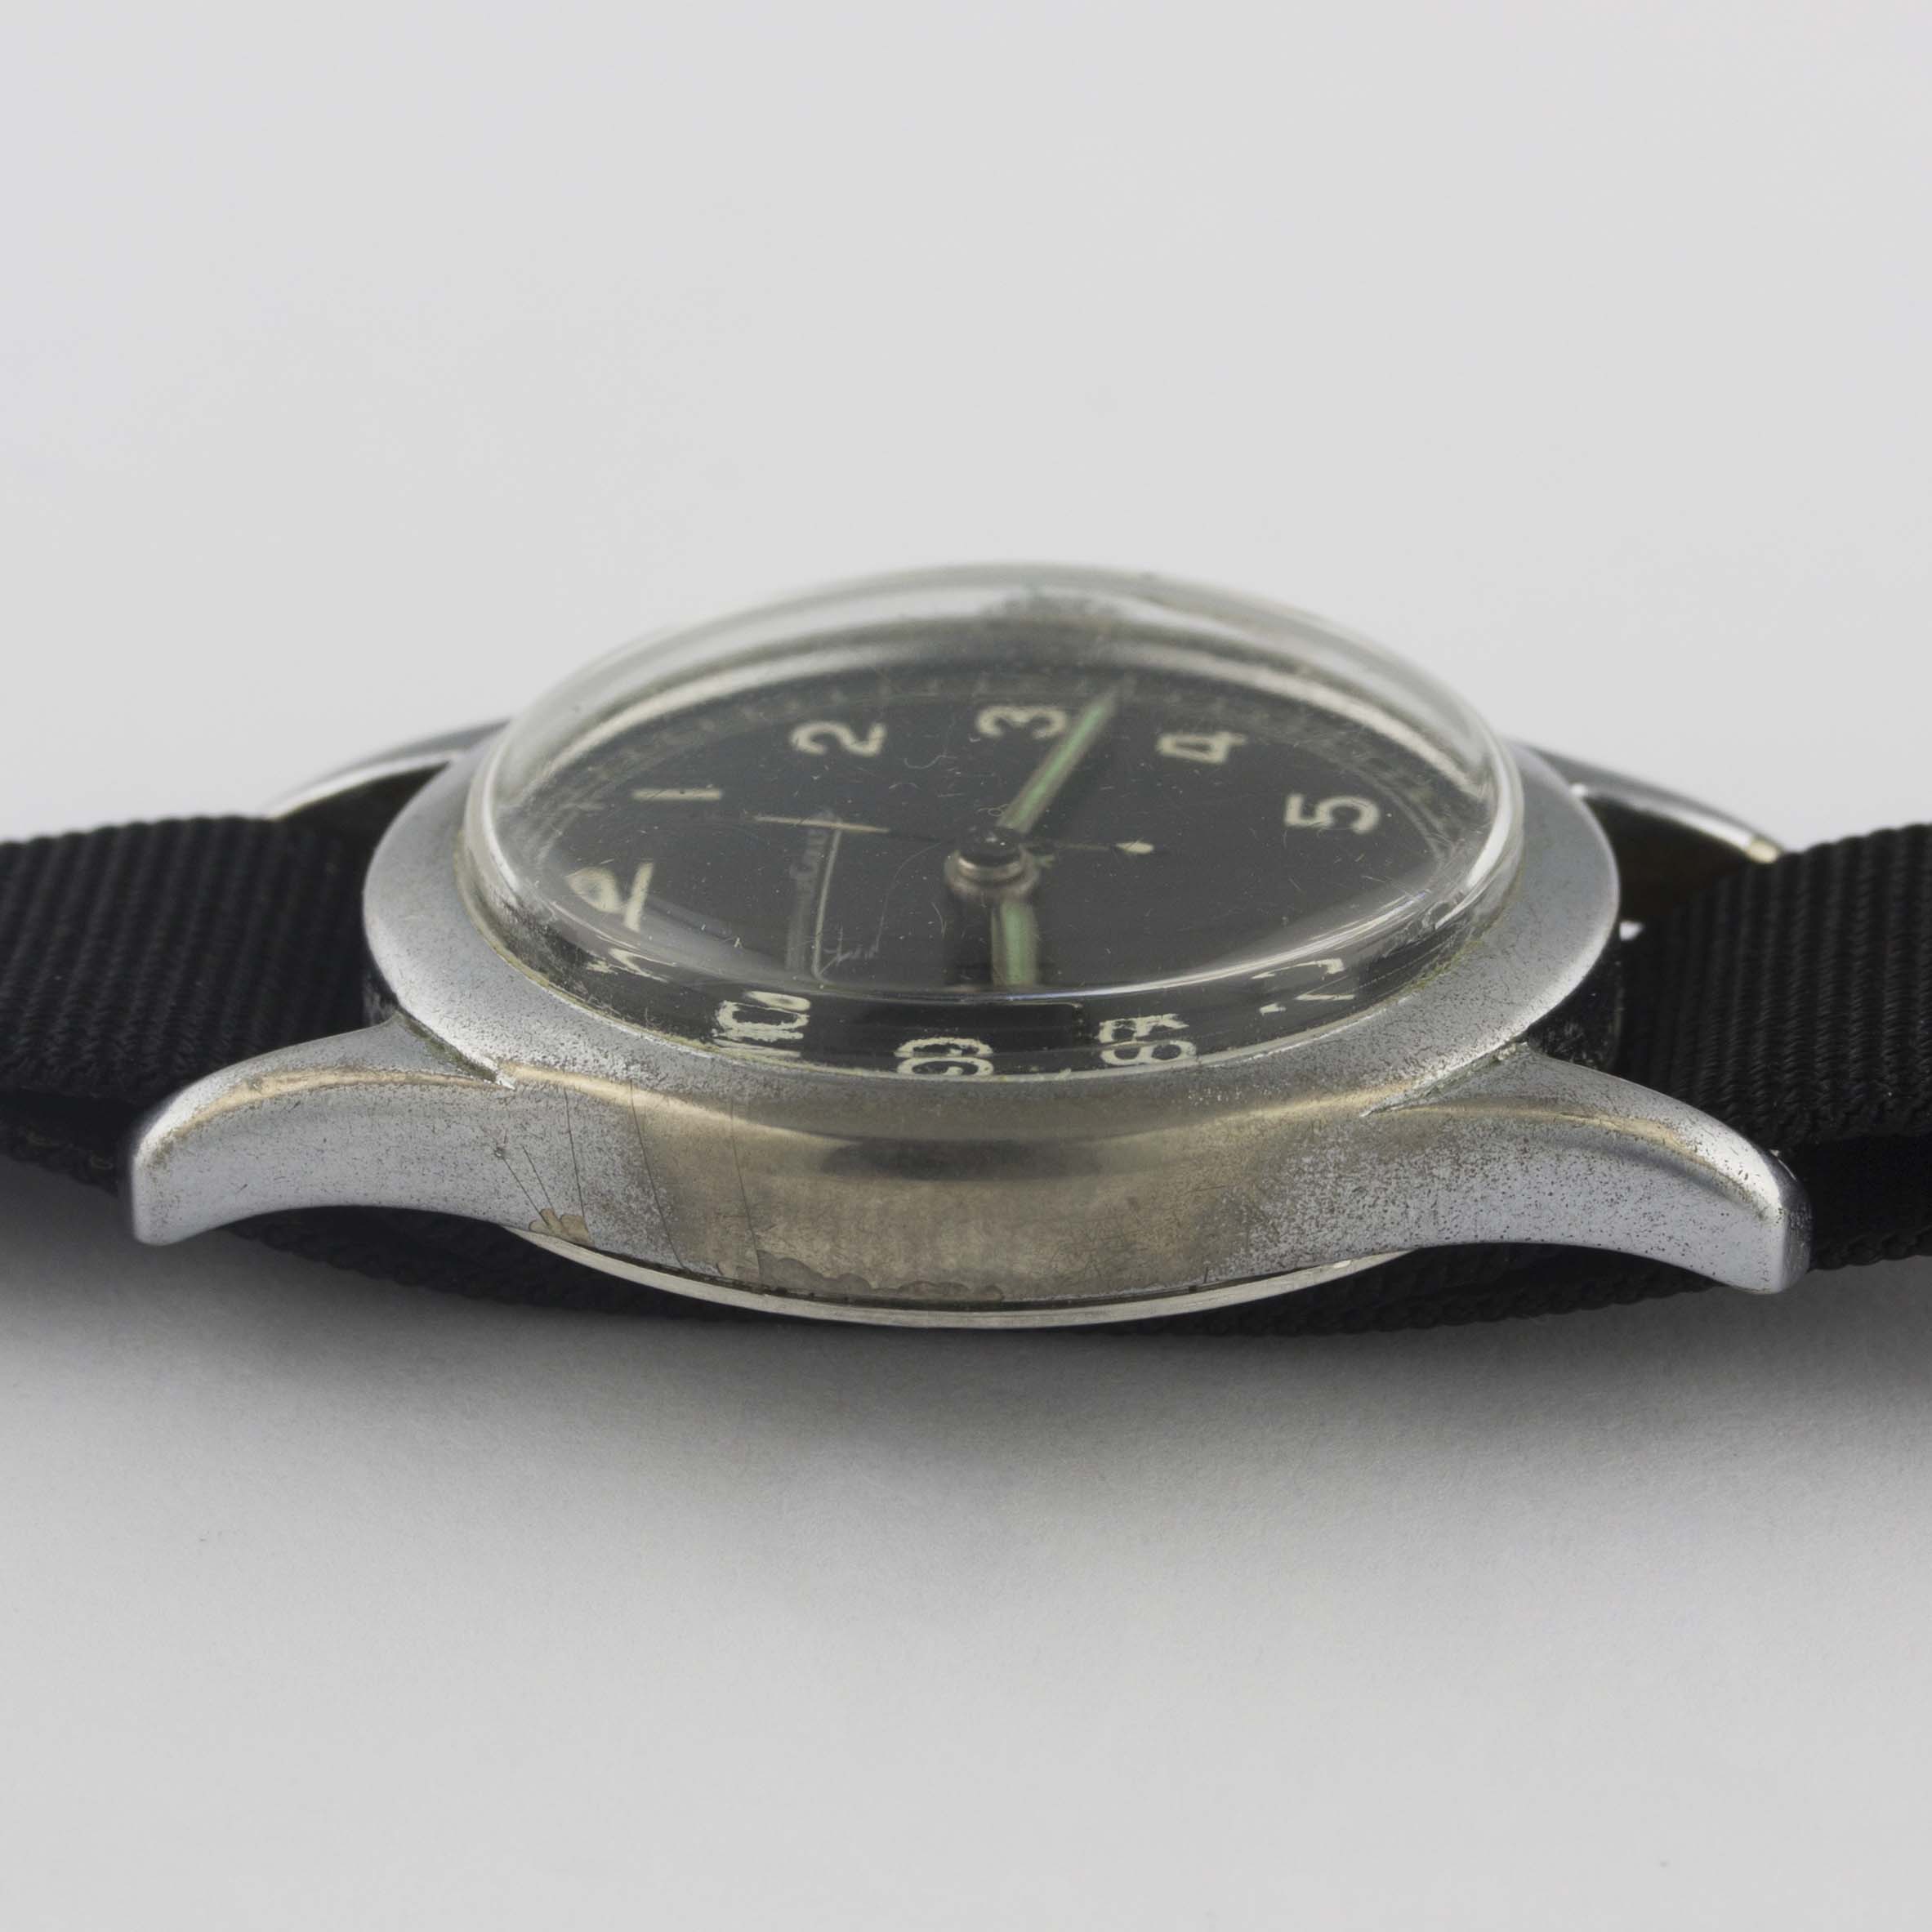 A GENTLEMAN'S BRITISH MILITARY JAEGER LECOULTRE RAF PILOTS WRIST WATCH CIRCA 1940, WITH BLACK MOD - Image 10 of 10